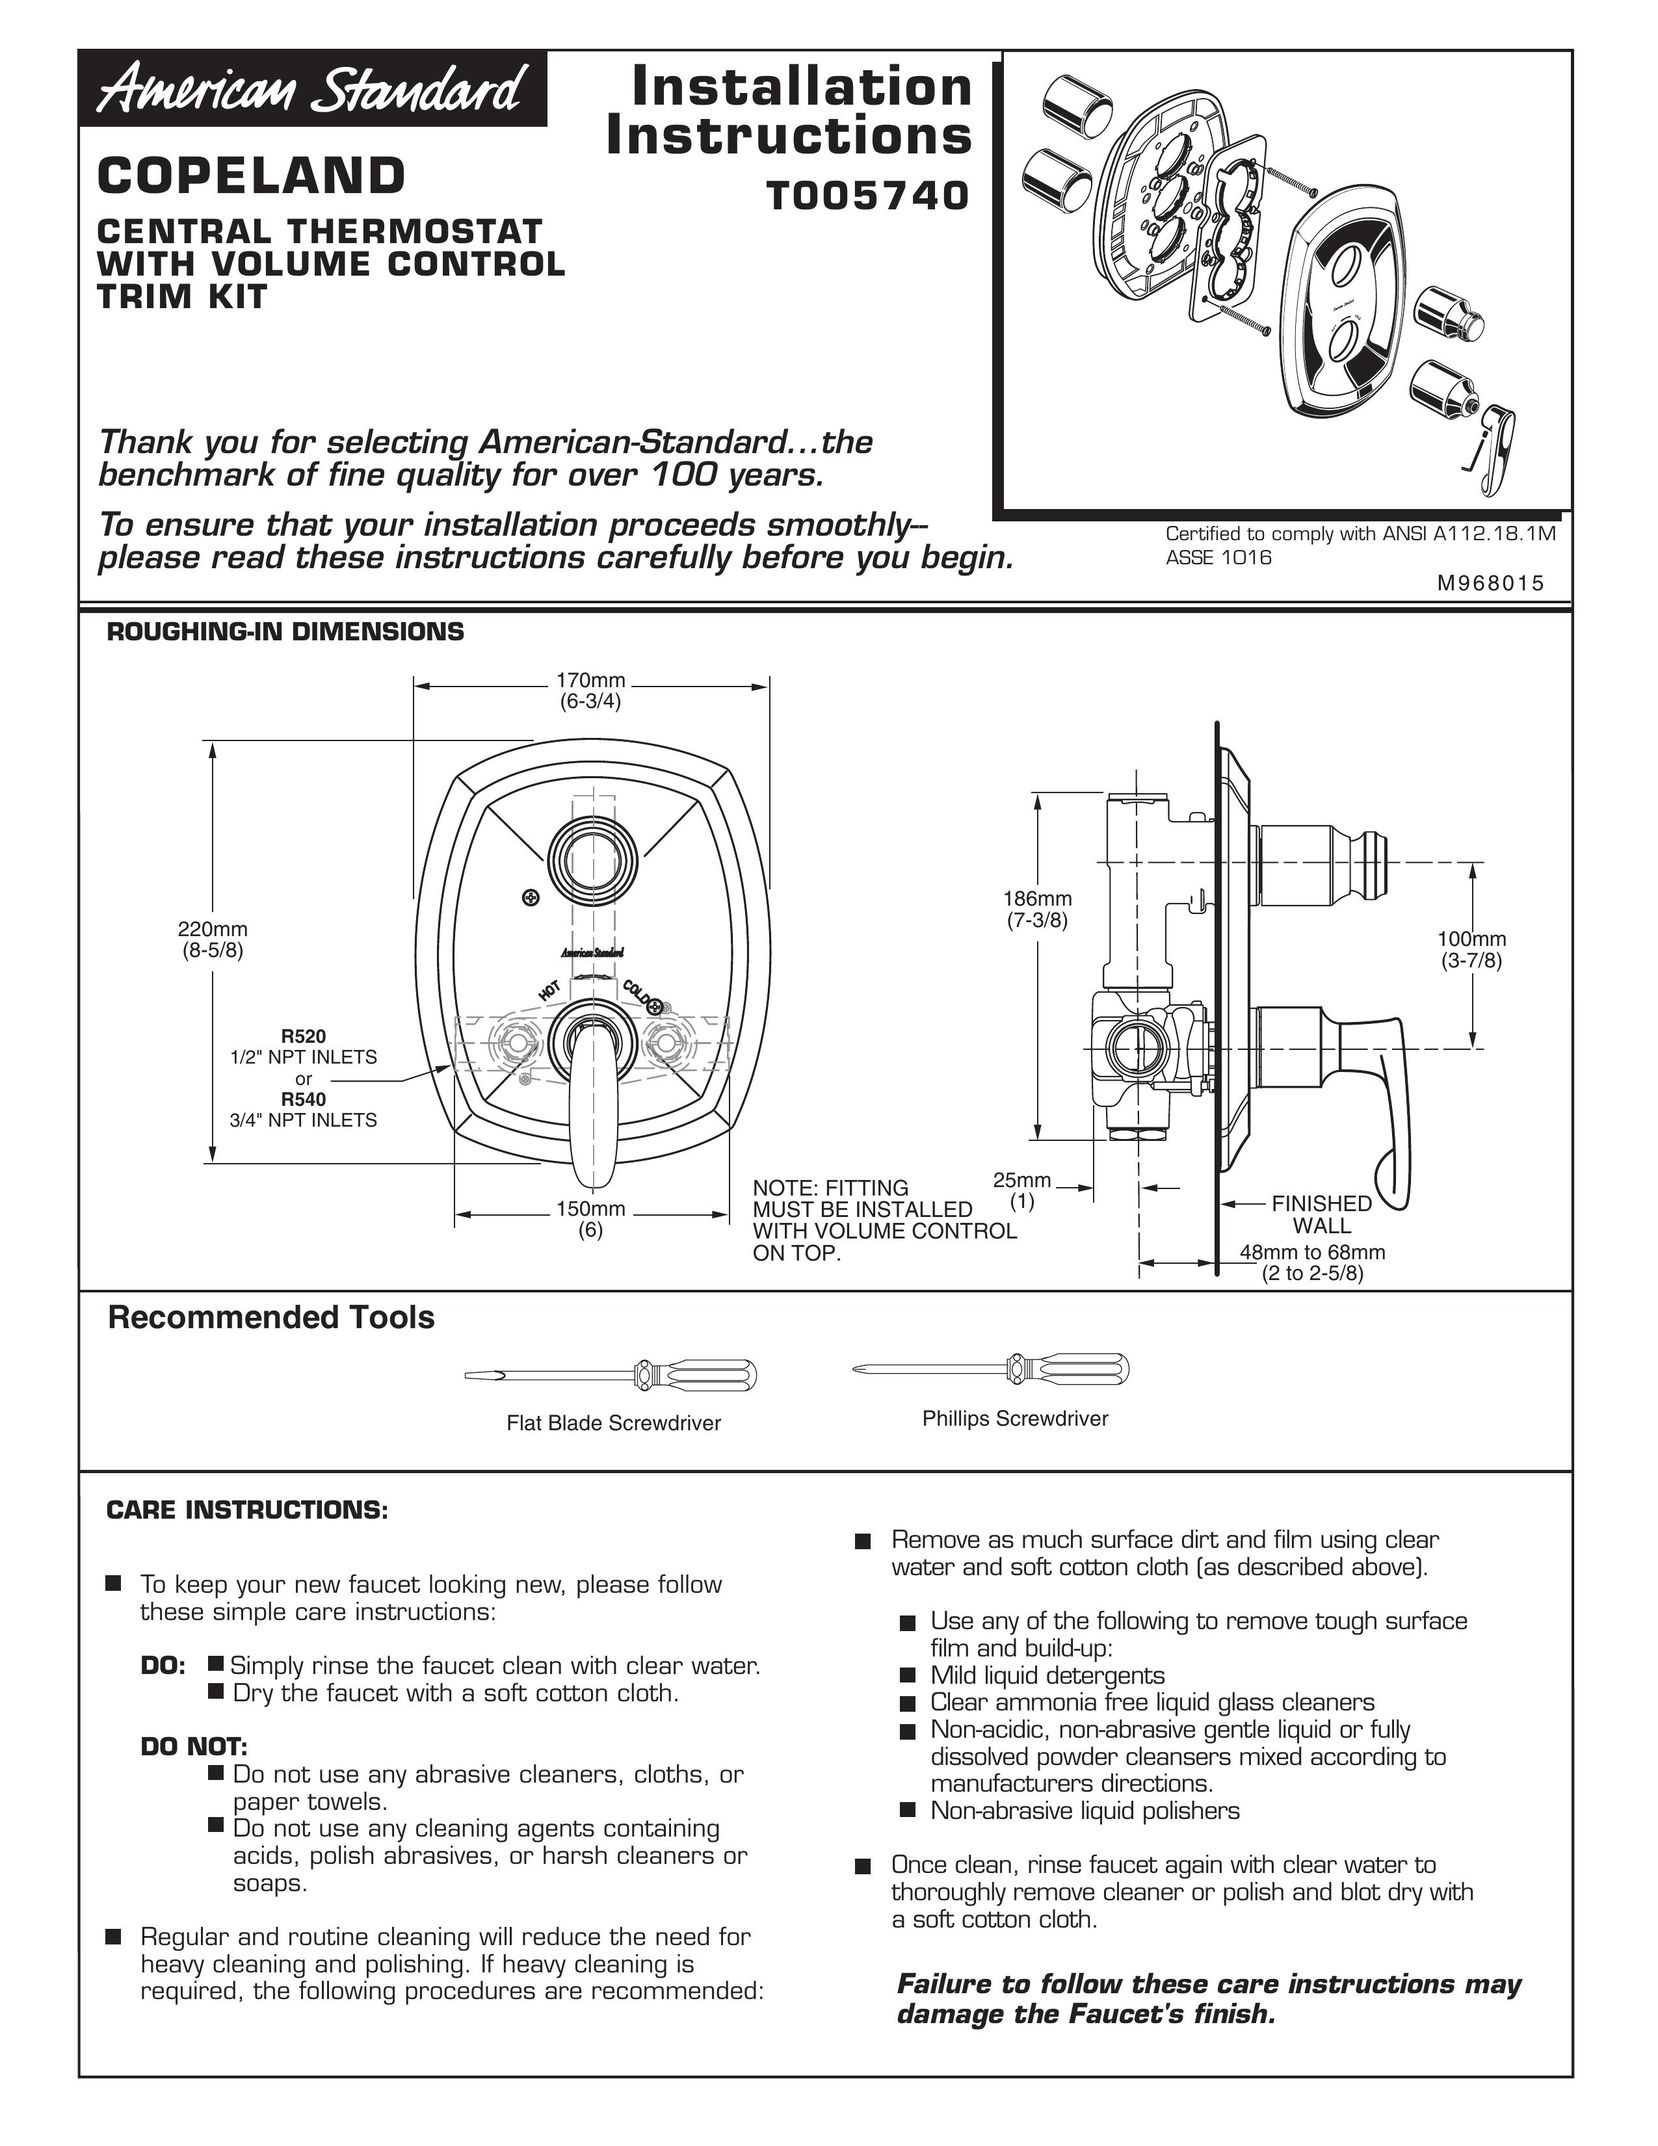 American Standard T005740 Thermostat User Manual